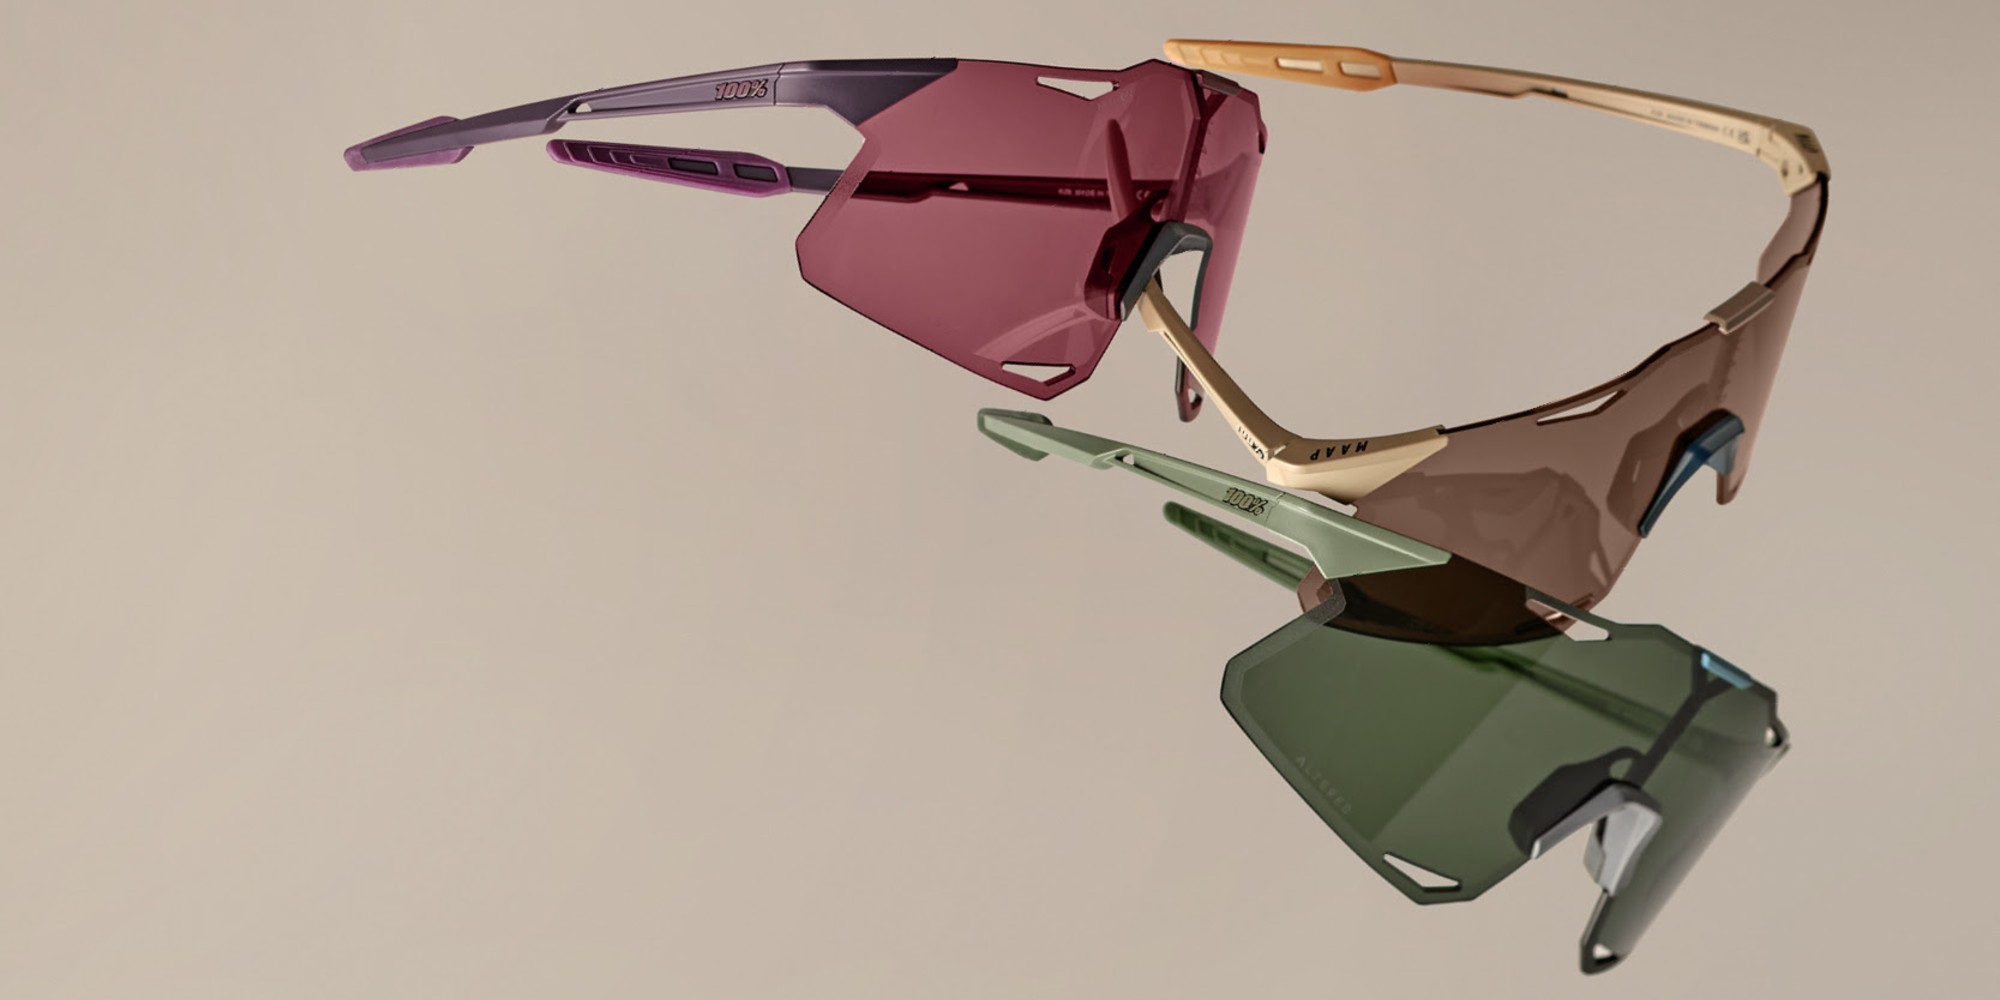 Maap and 100% Hypercraft sunglasses now available in three new seasonal